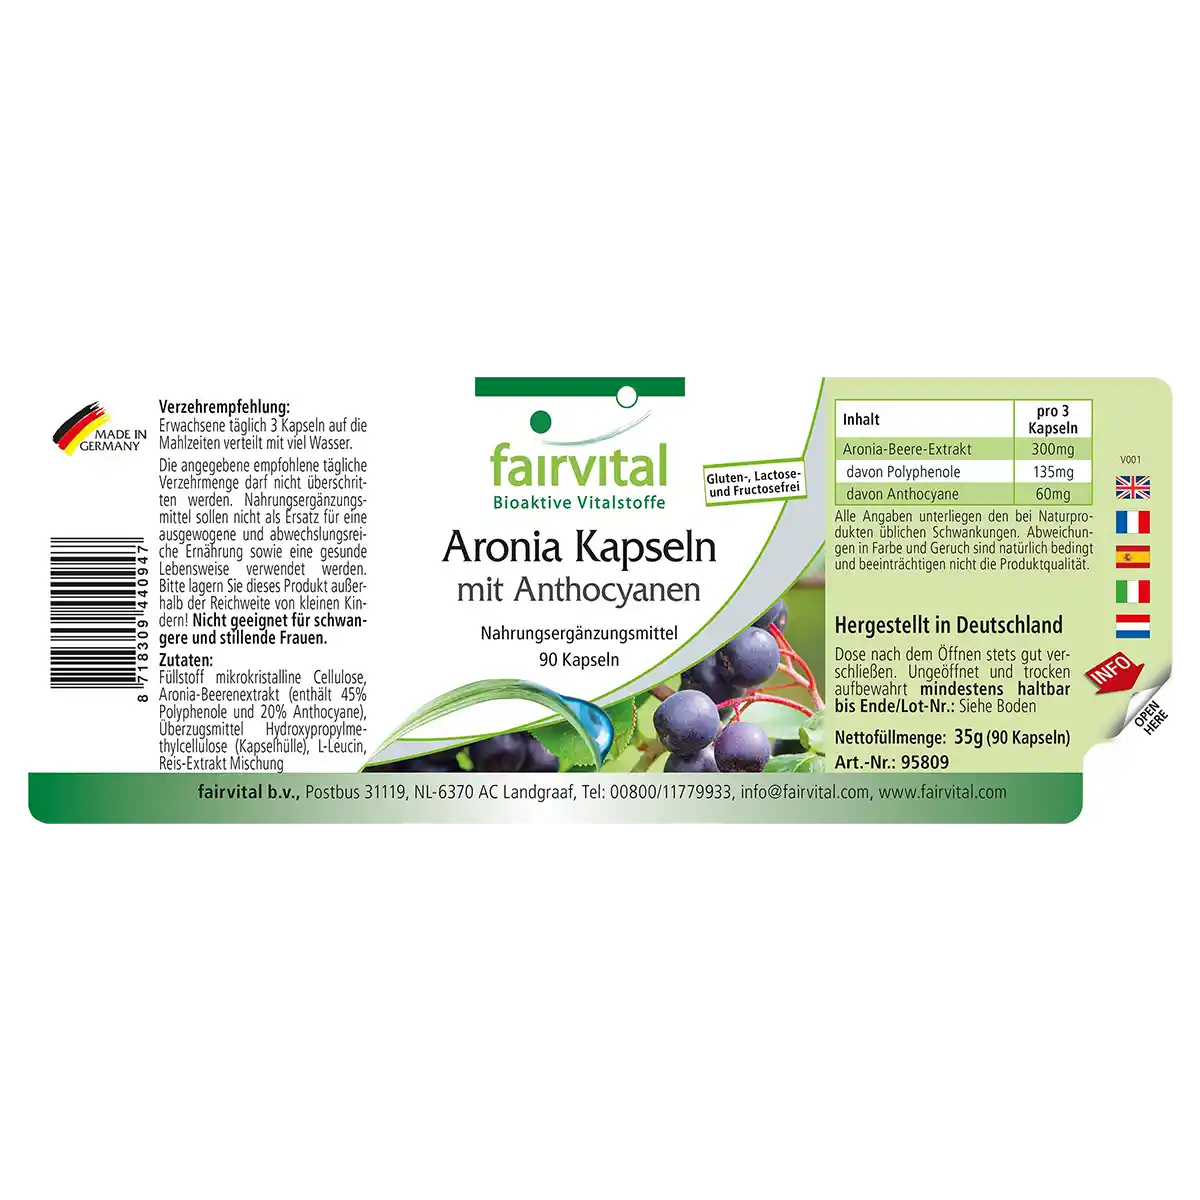 Aronia capsules with anthocyanins - 90 capsules